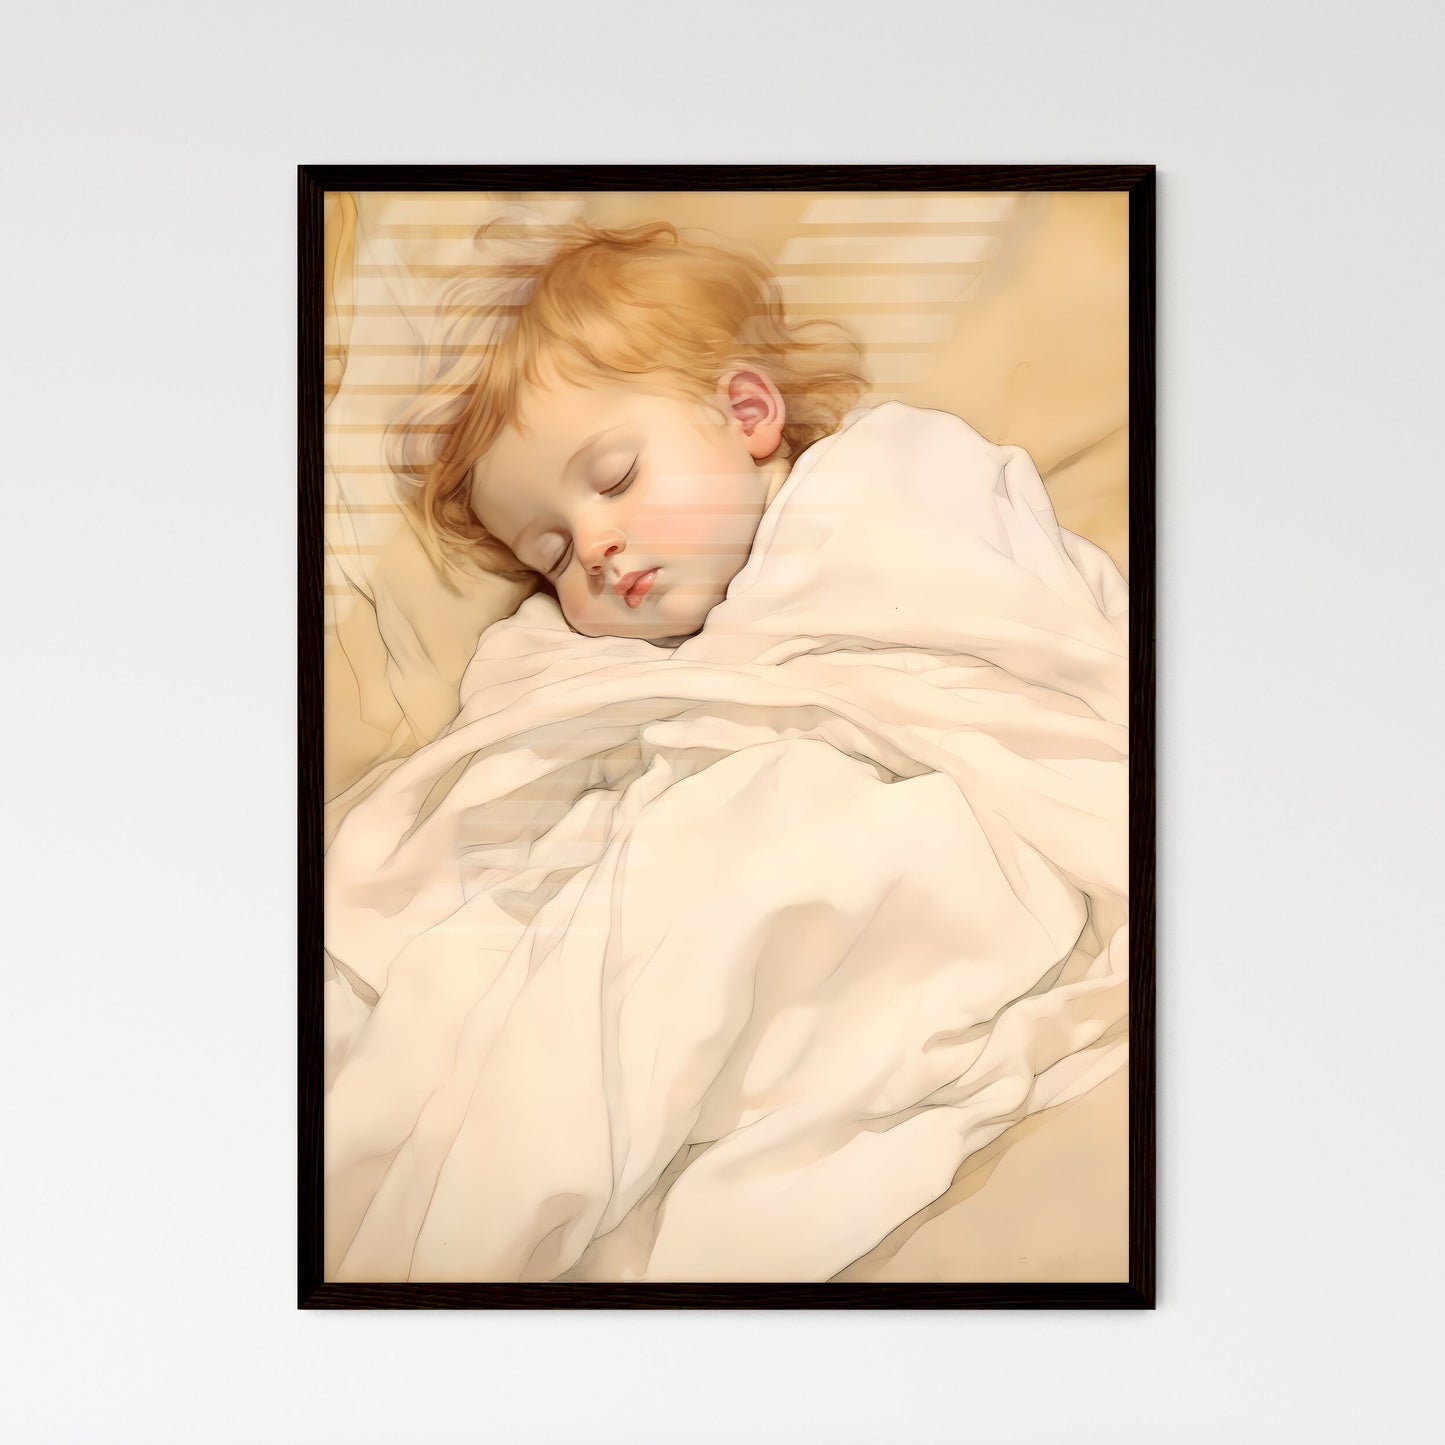 A Poster of baby sleeping in a white blanket - A Child Sleeping In A Blanket Default Title